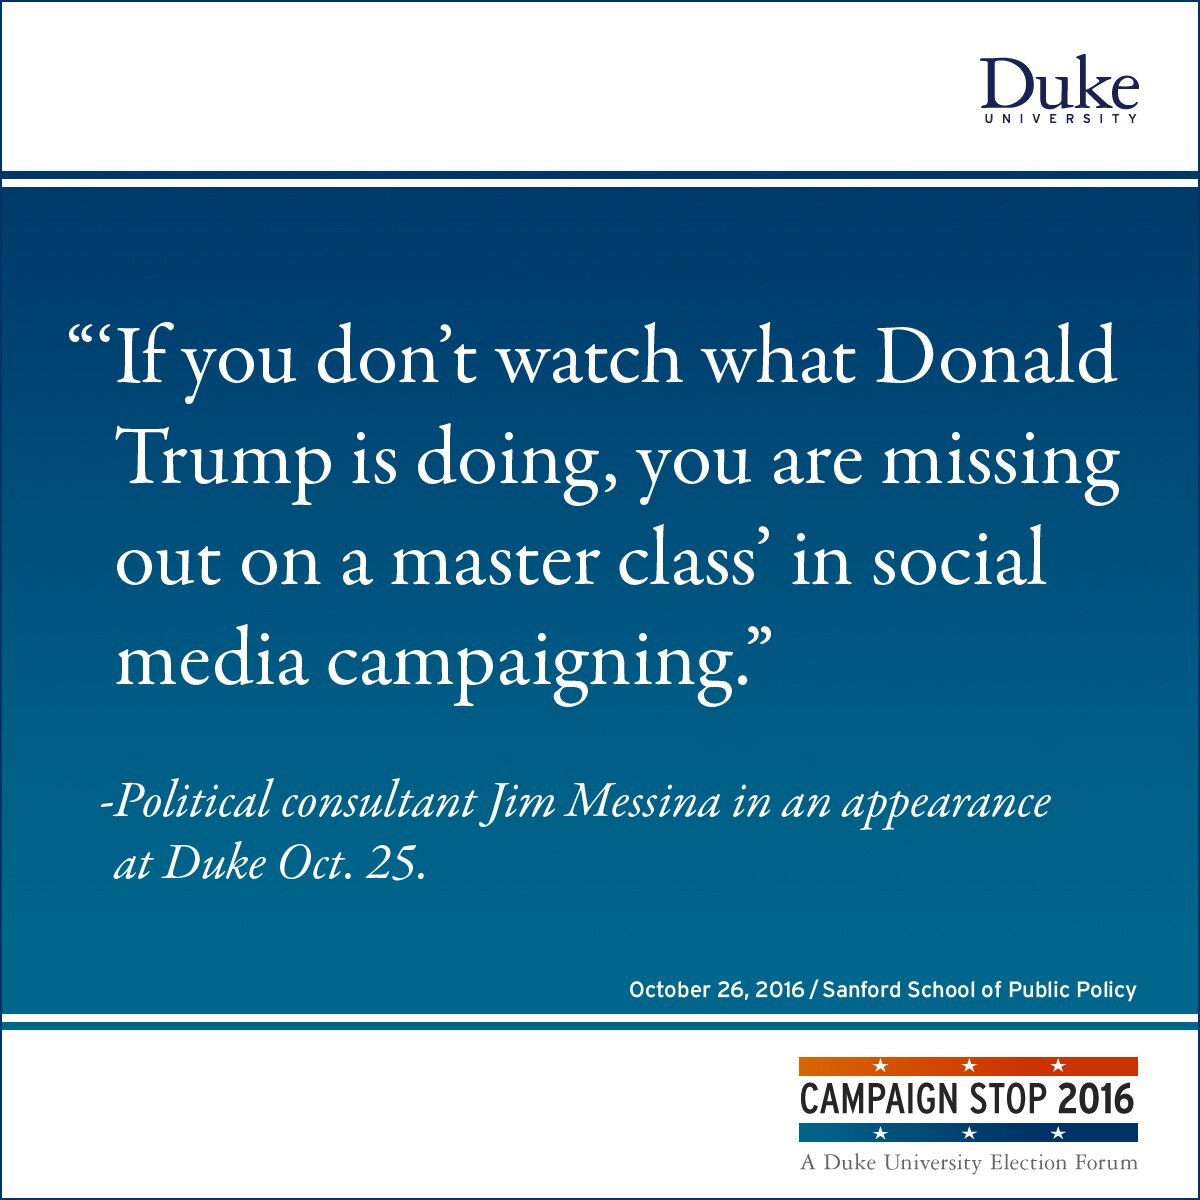 “‘If you don’t watch what Donald Trump is doing, you are missing out on a master class’ in social media campaigning.” -Political consultant Jim Messina in an appearance at Duke Oct. 25.